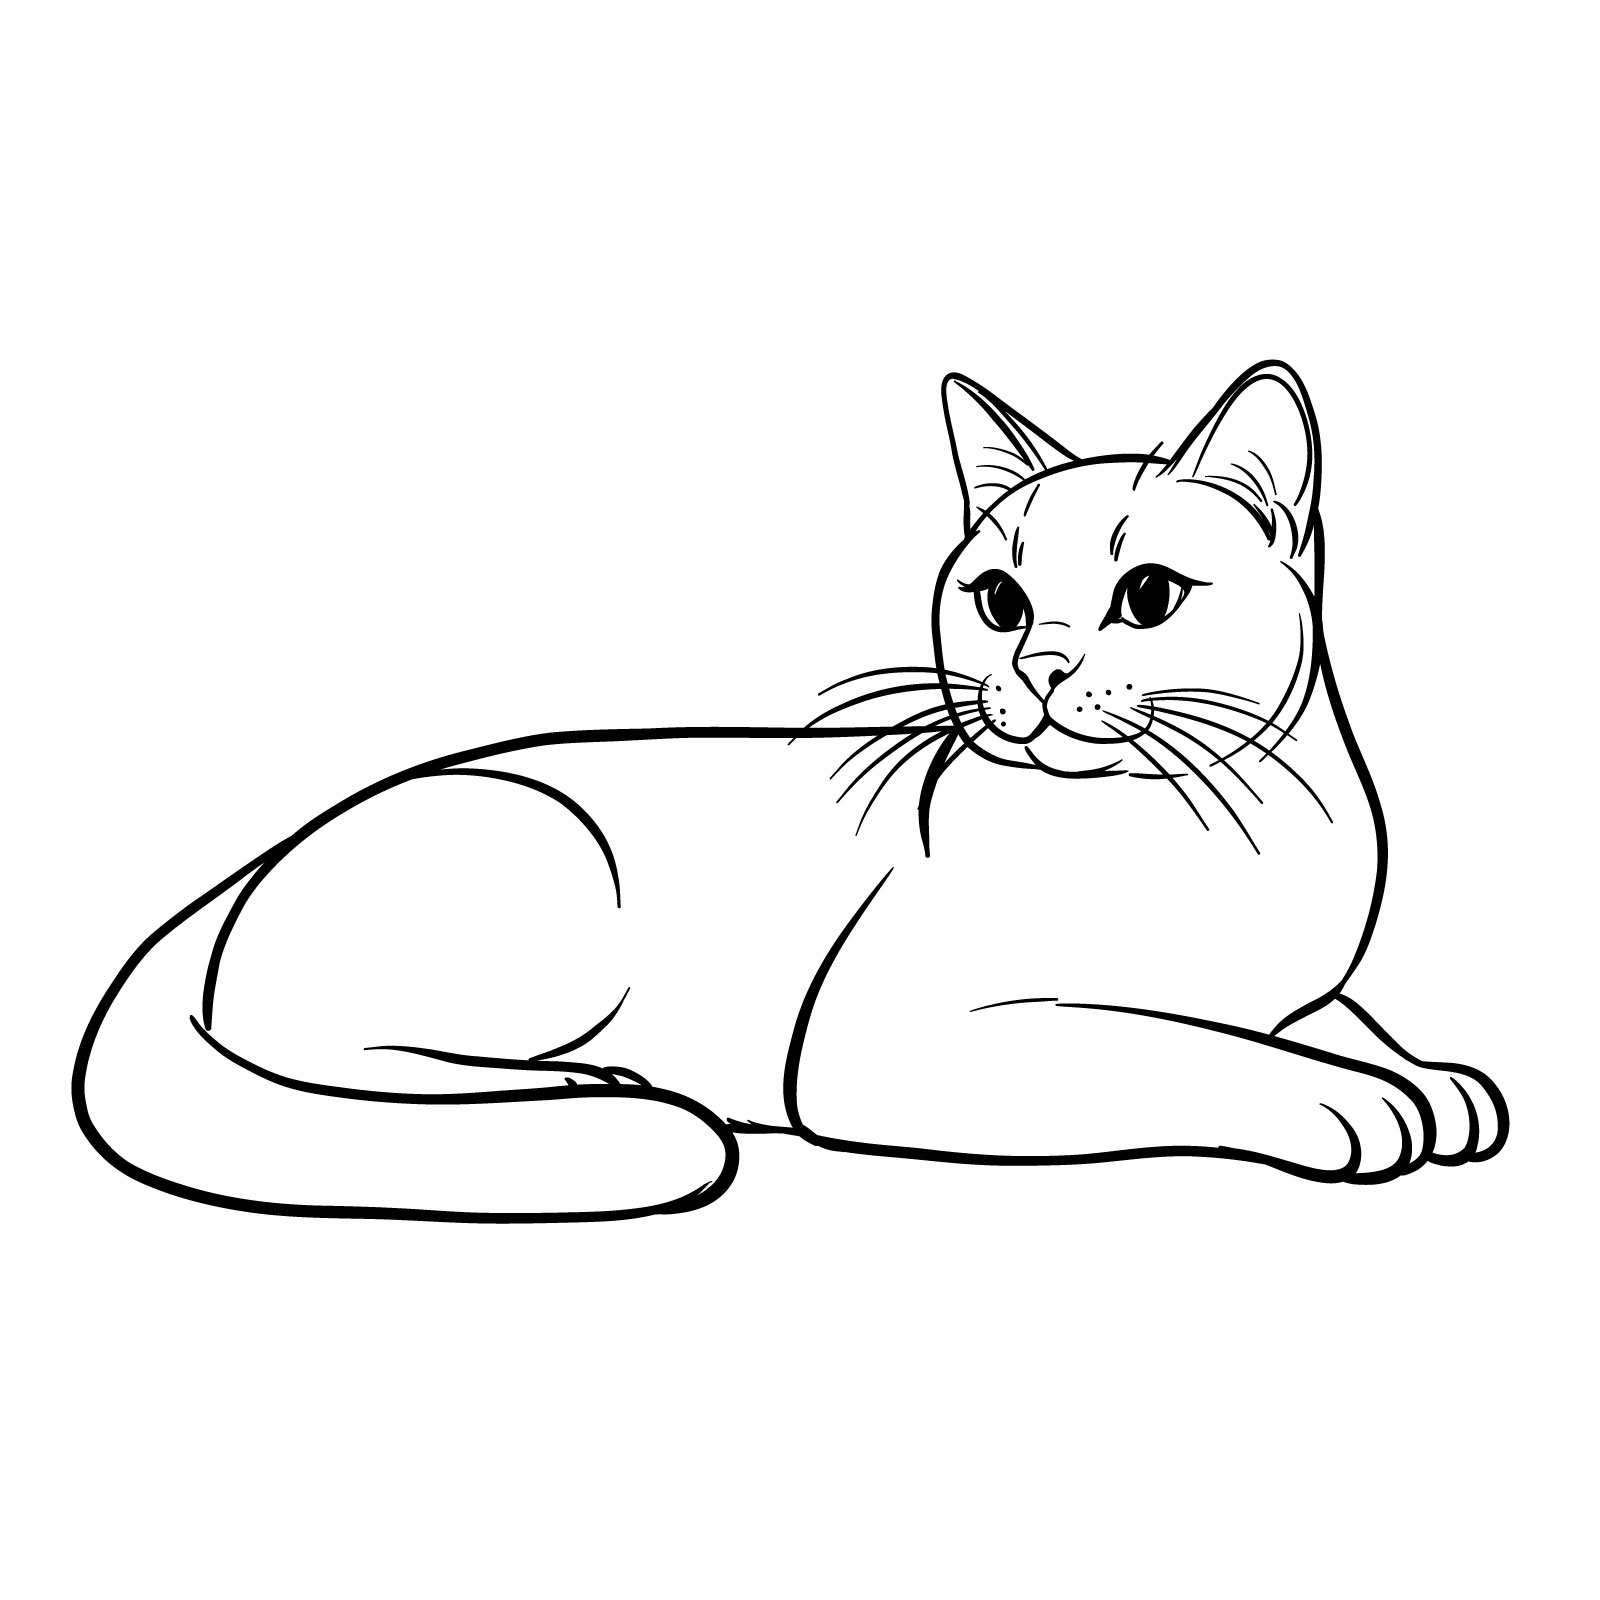 How to Draw a Lying Cat - Side View - Easy Step-by-Step Guide